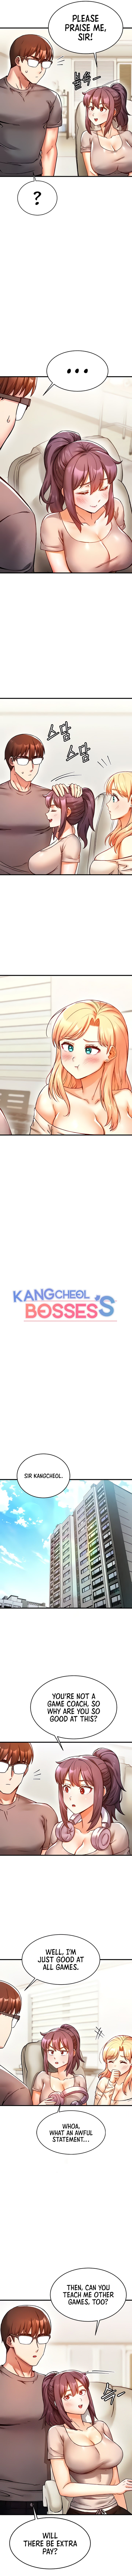 Kangcheol’s Bosses - Chapter 7 Page 2